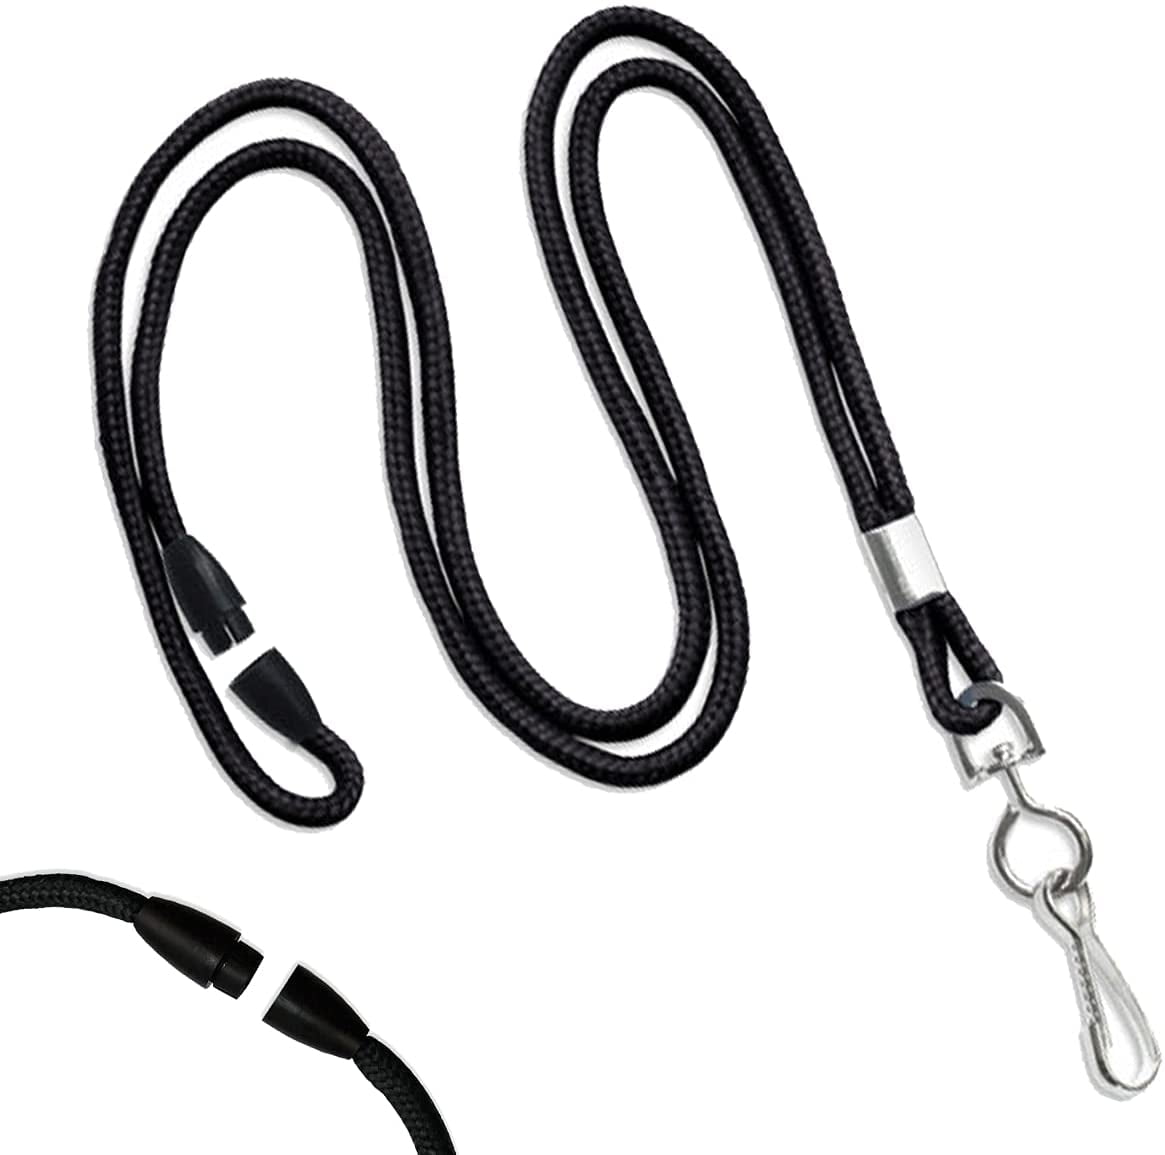 LOT 200 NECK STRAPS LANYARD WITH HOOK BLACK 200 CLEAR VINYL ID BADGE HOLDERS 